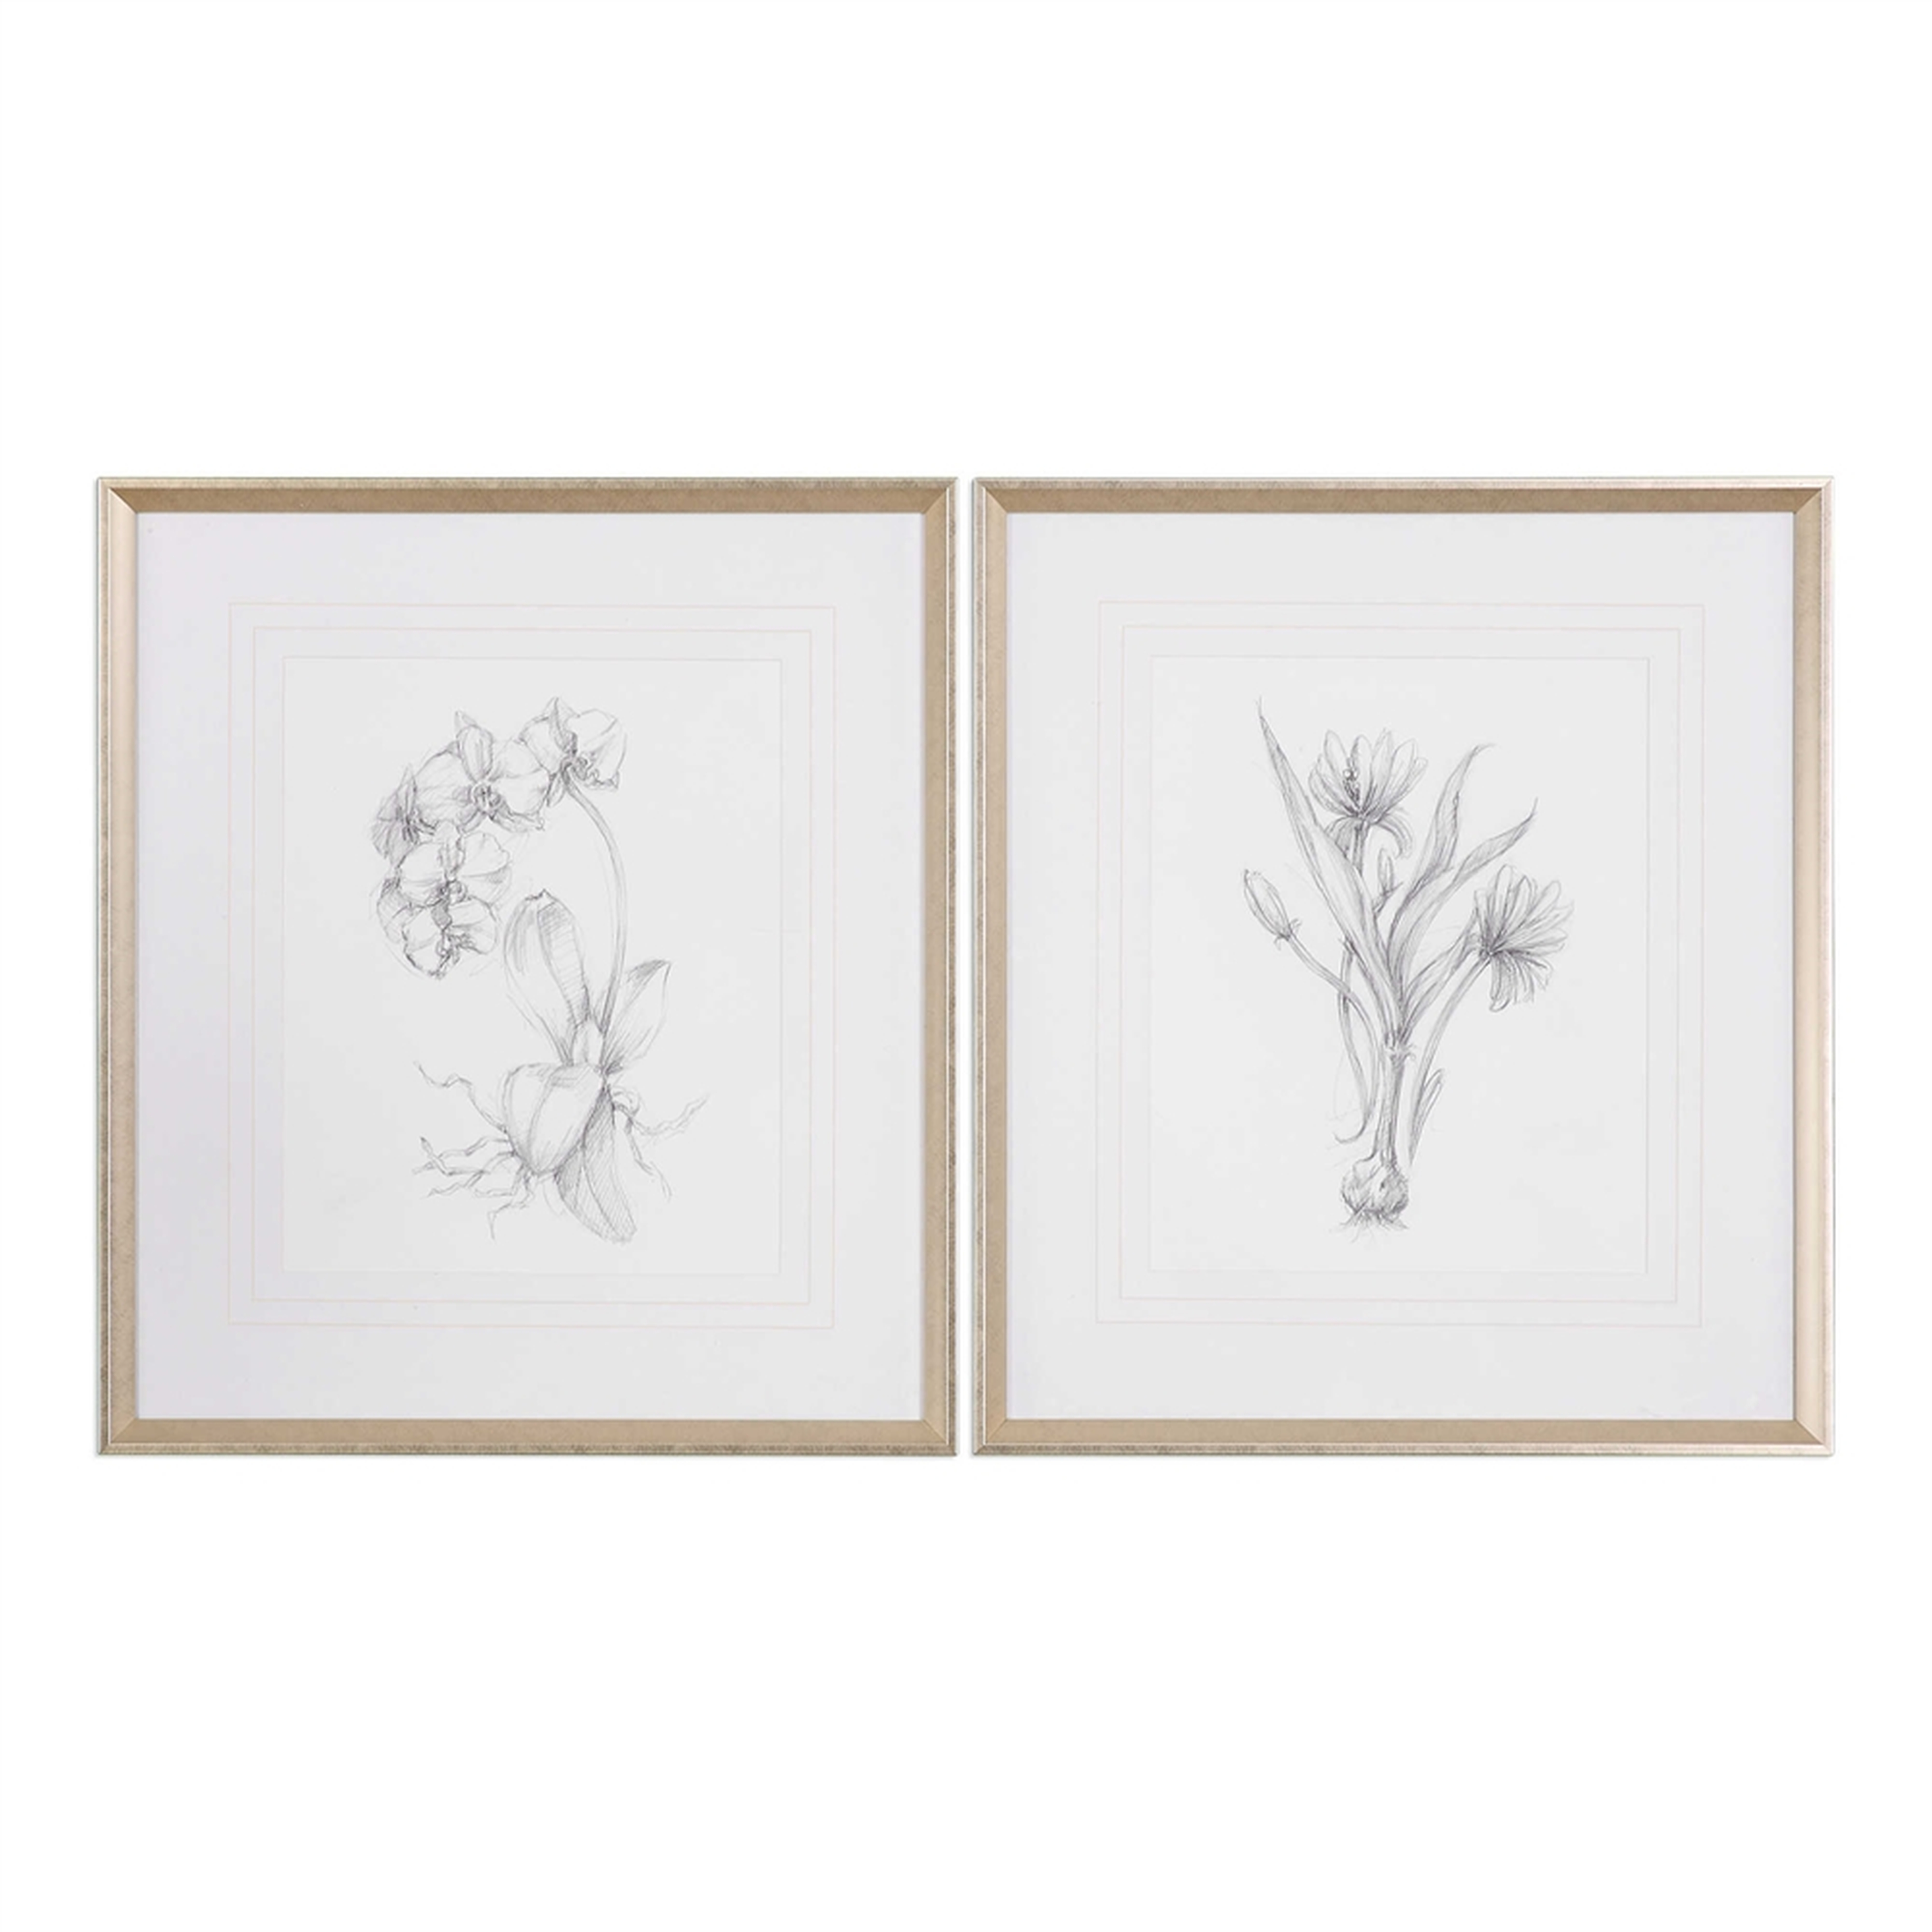 Botanical Sketches, S/2 - 28x32 - Silver/Taupe Frame-with mat - Hudsonhill Foundry